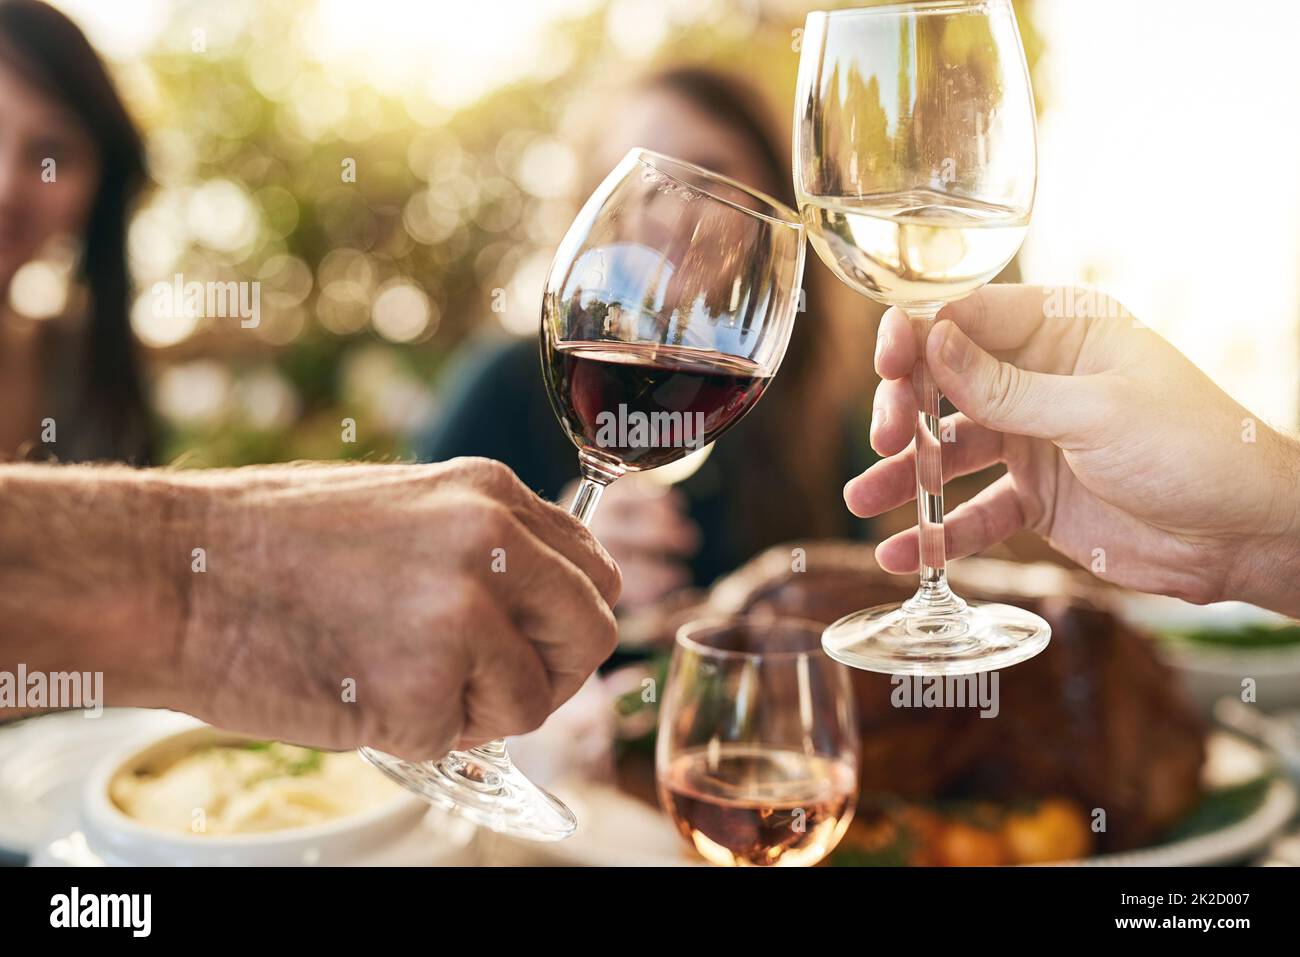 Heres to all of us being here today. Shot of a group of cheerful people celebrating with a toast over a dinner table outside. Stock Photo